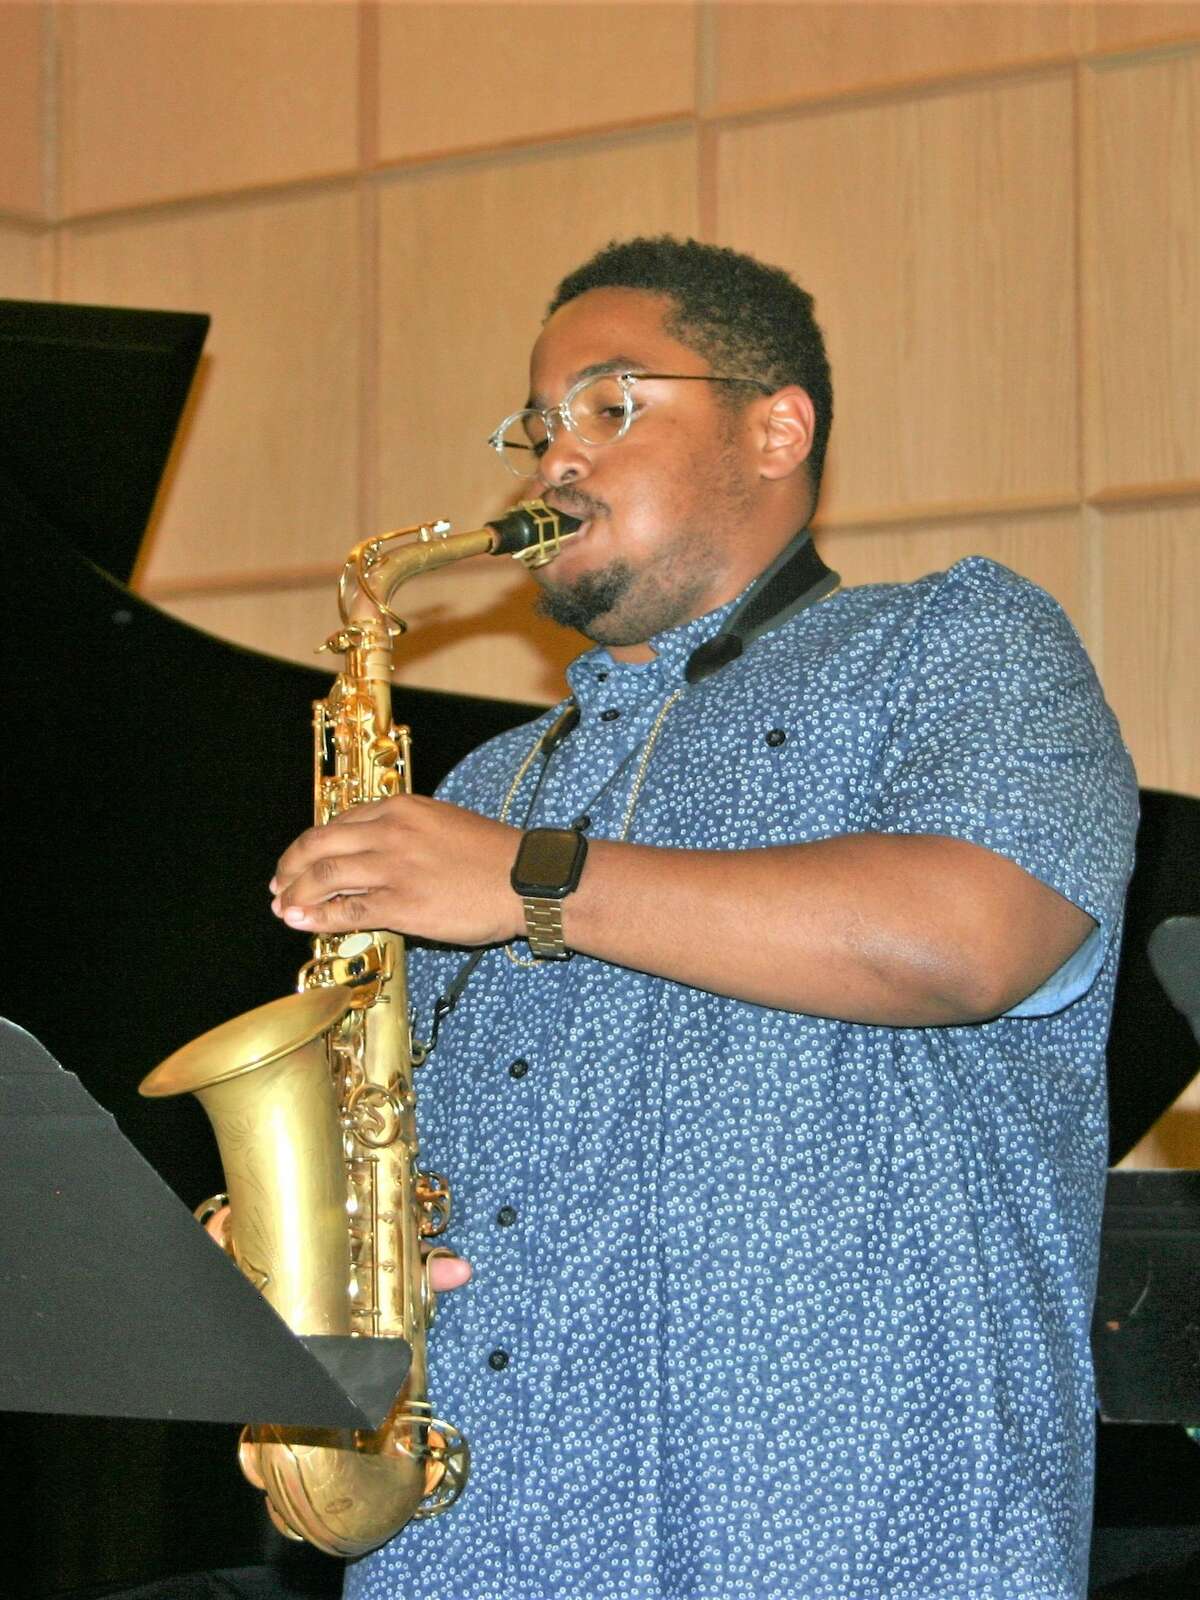 It was a day of Fathers and Sons as the Tuba Bach Chamber Music Festival featured father/son pairs performing New Orleans style jazz at Immanuel Lutheran Church on Sunday, part of the 17th annual Tuba Bach concert series.